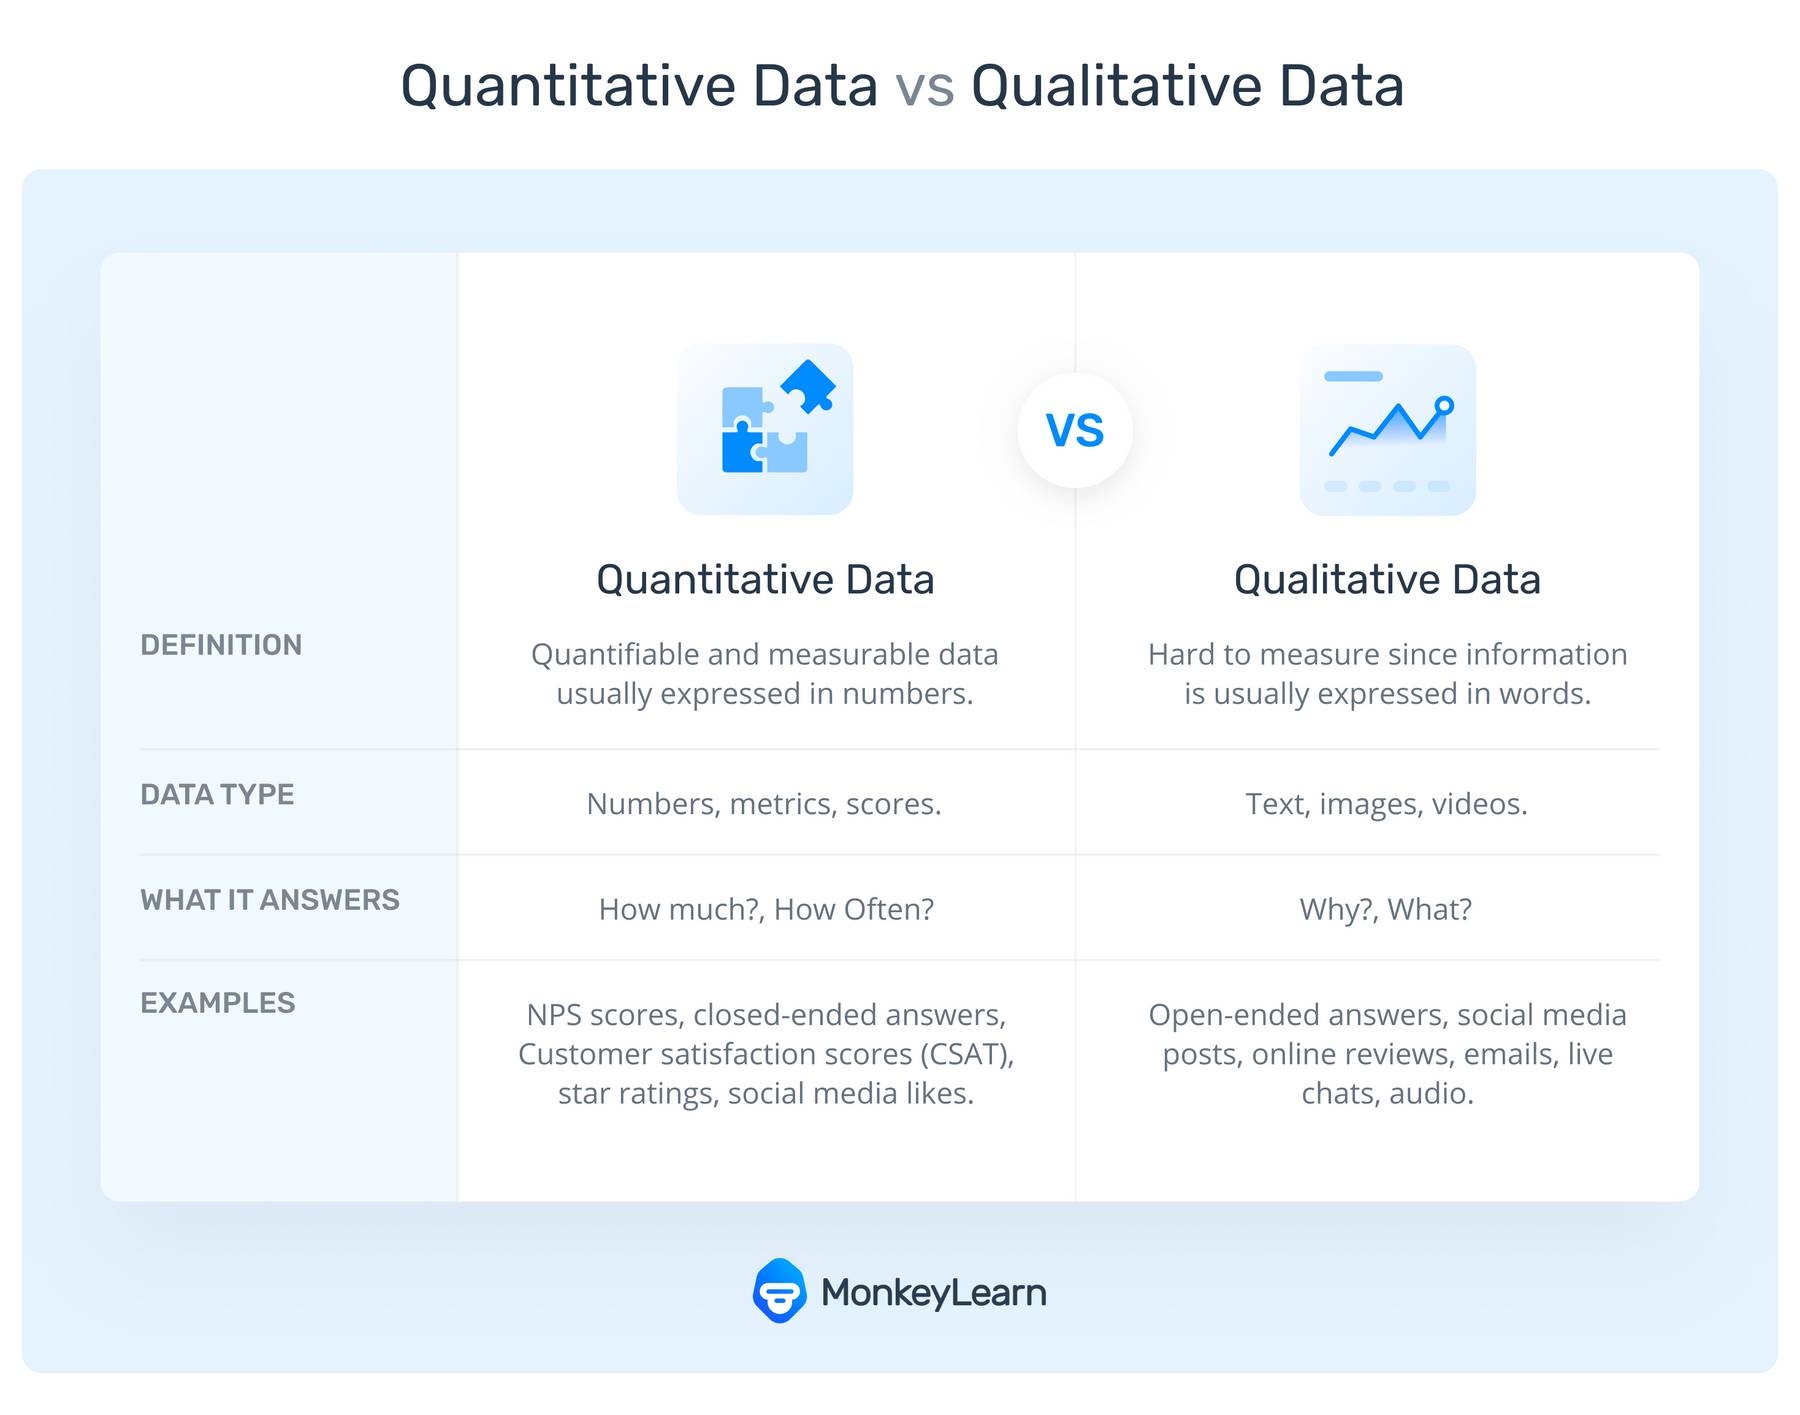 The differences between qualitative and quantitative data, including a definition, types of data, what it answers, and examples of both data types.